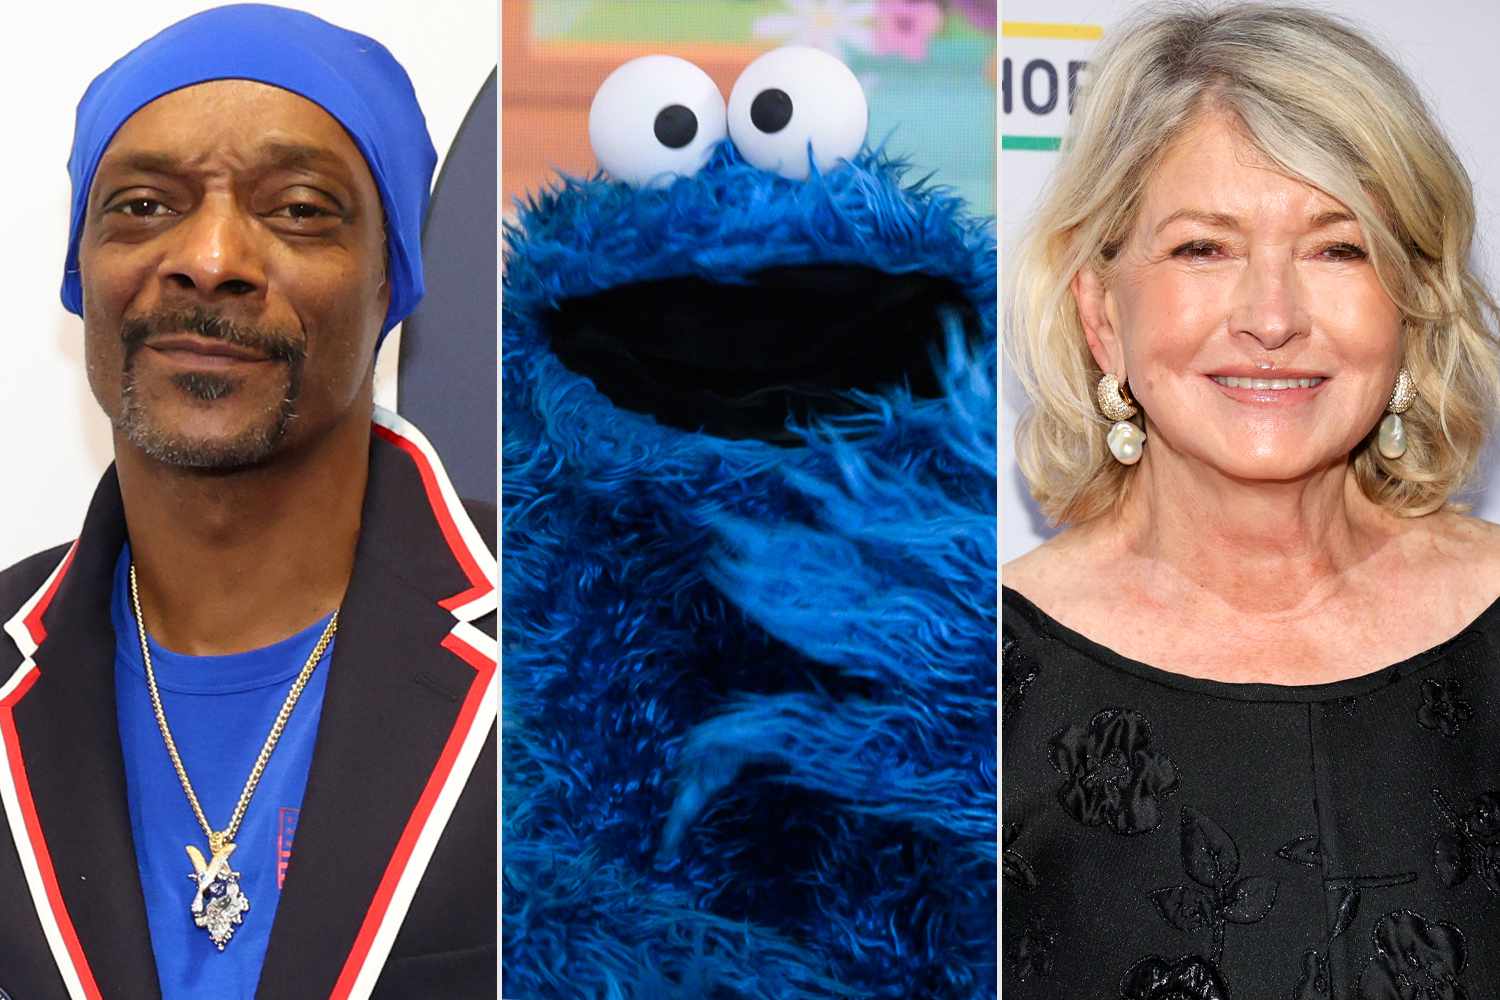 Snoop Dogg and Cookie Monster surprise Martha Stewart with birthday cake at Olympics: 'It's all cookies!'